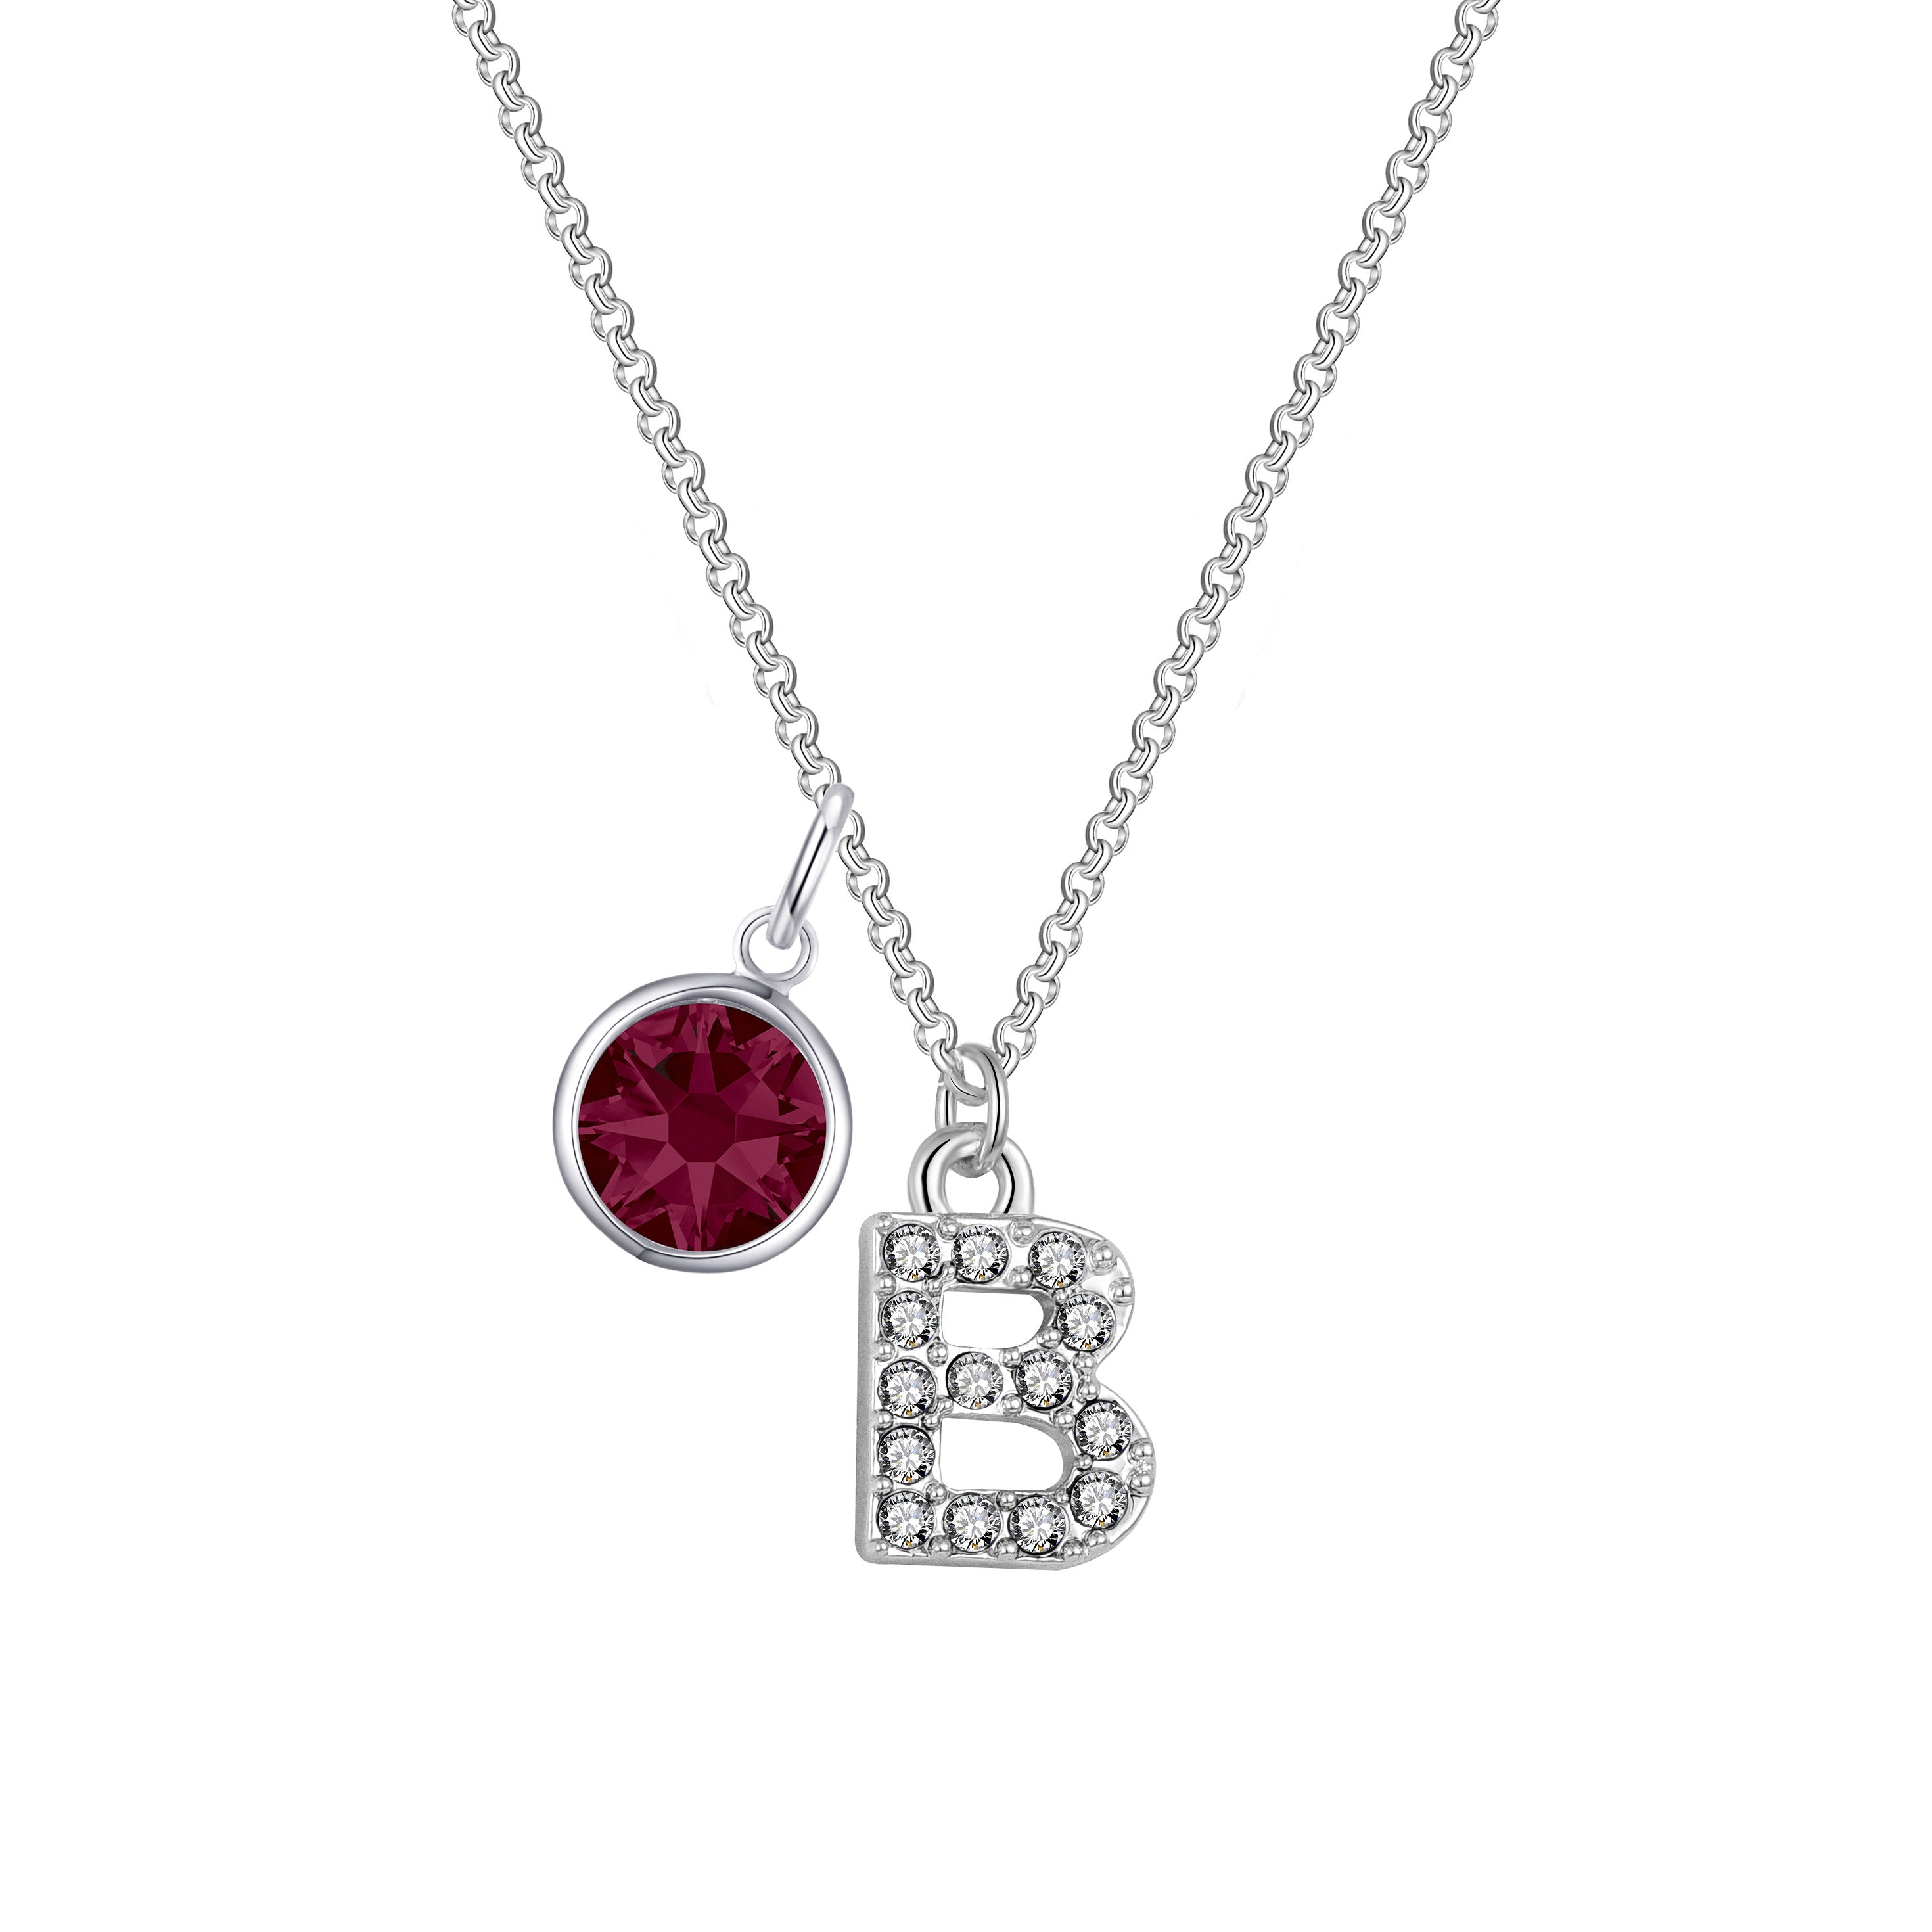 Birthstone Pave Initial Necklace Letter B Created with Zircondia® Crystals